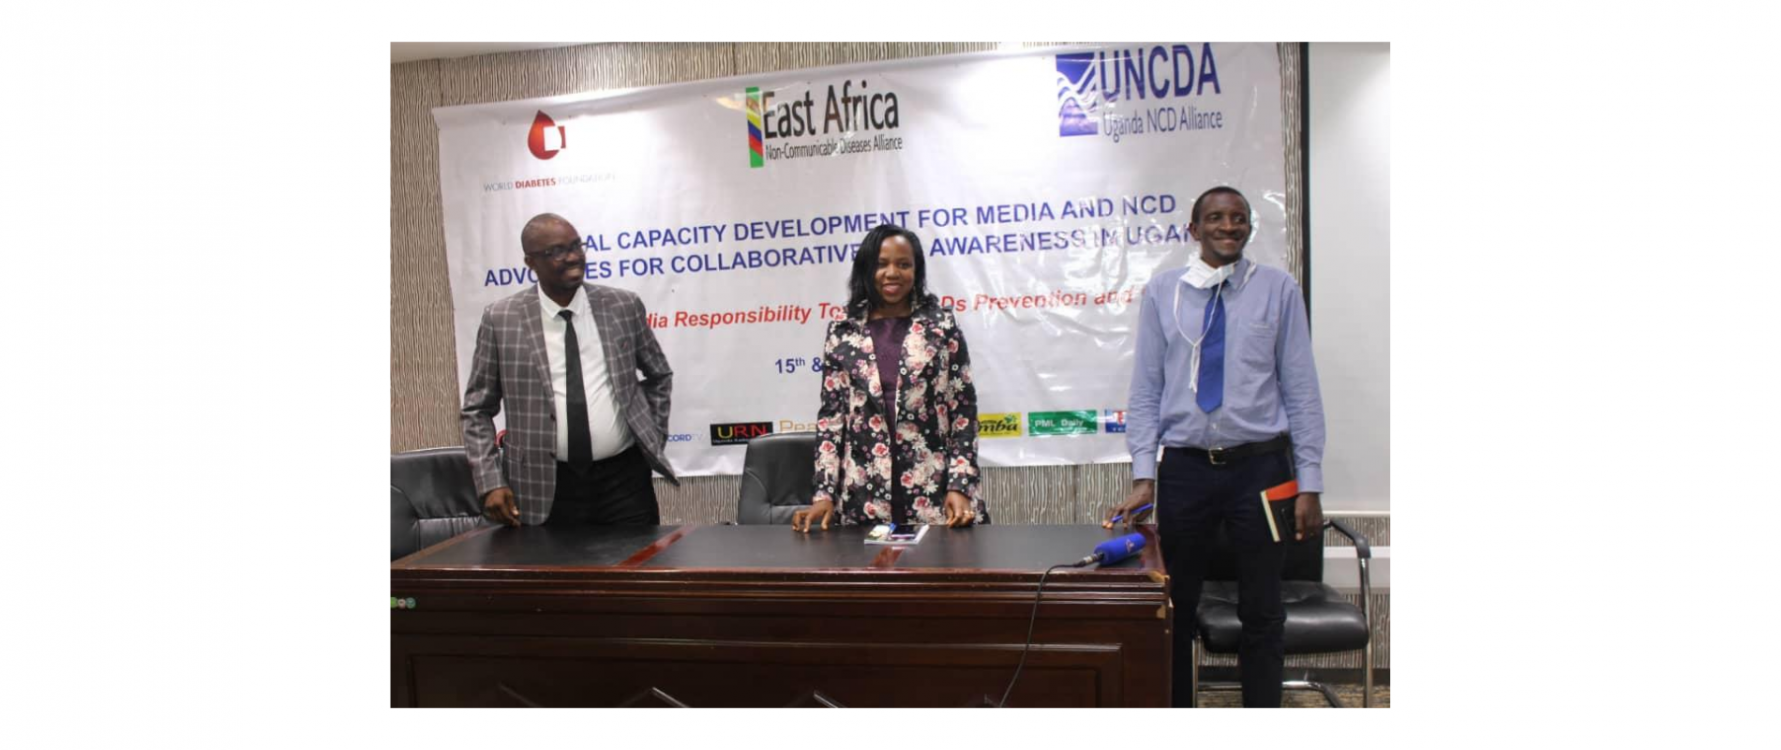 East Africa enhances media coverage on NCD prevention and control